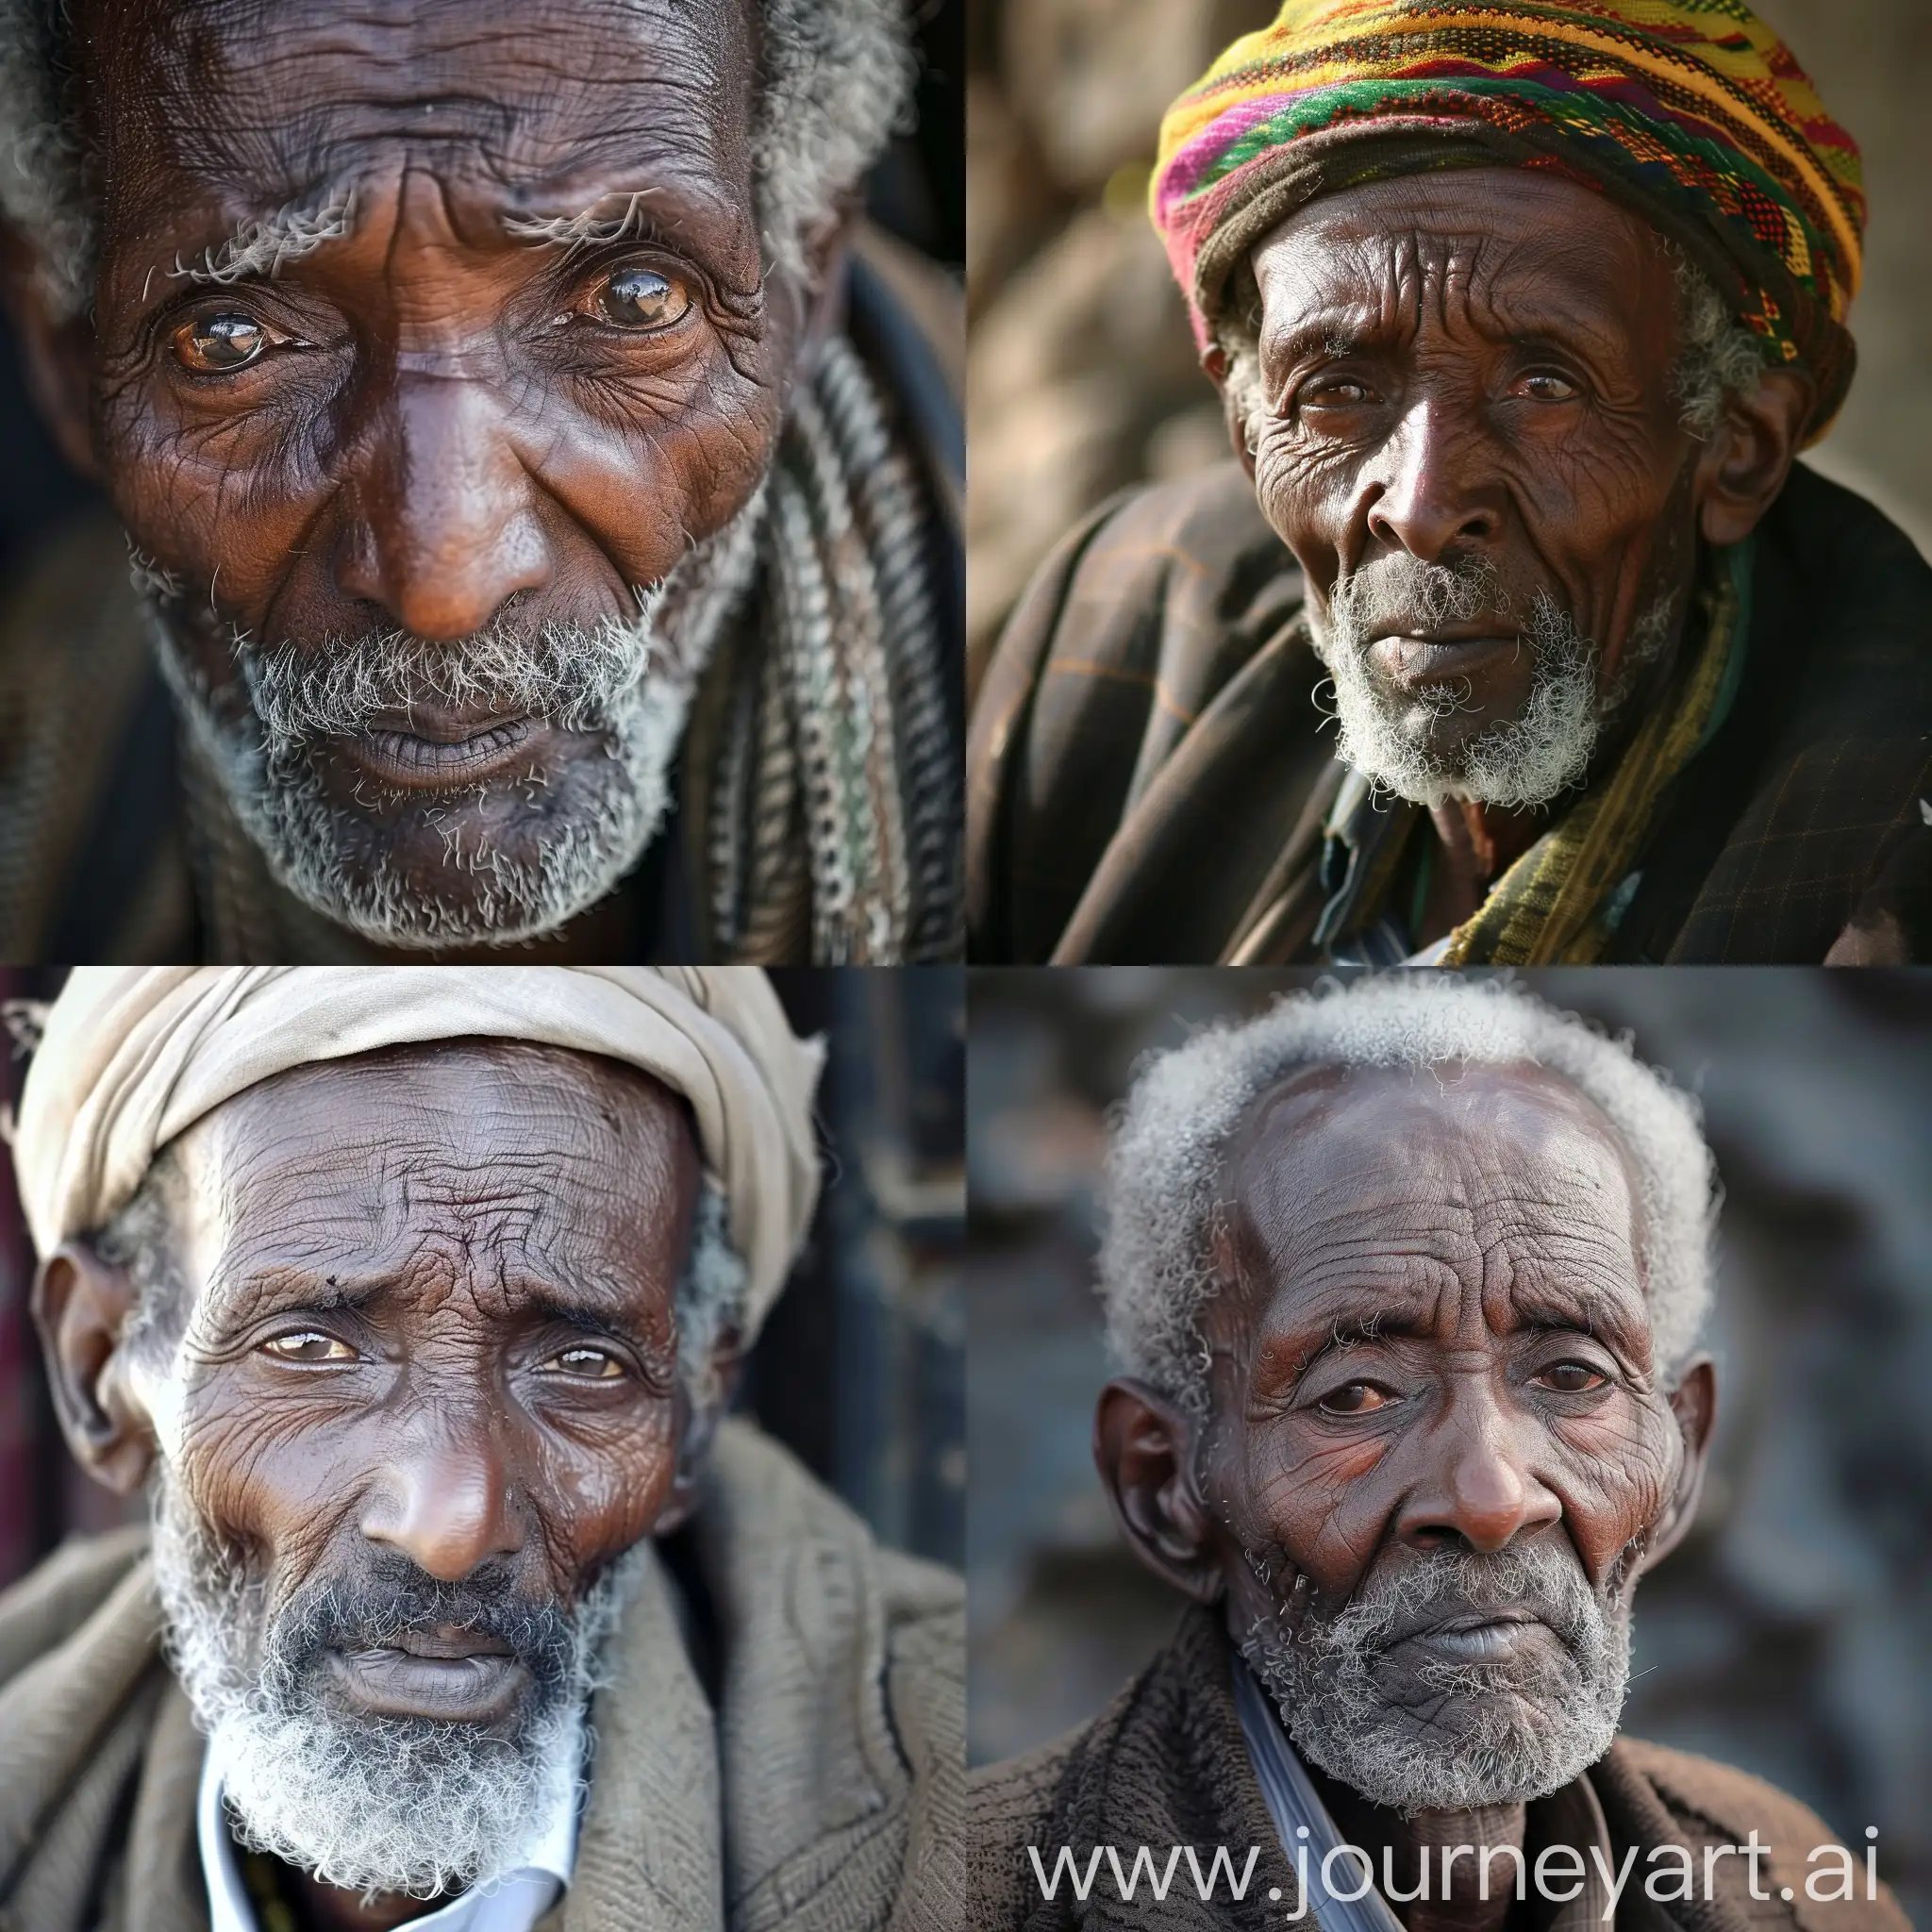 Portrait-of-an-Ethiopian-Elder-Traditional-Wisdom-and-Dignity-Captured-in-Depth